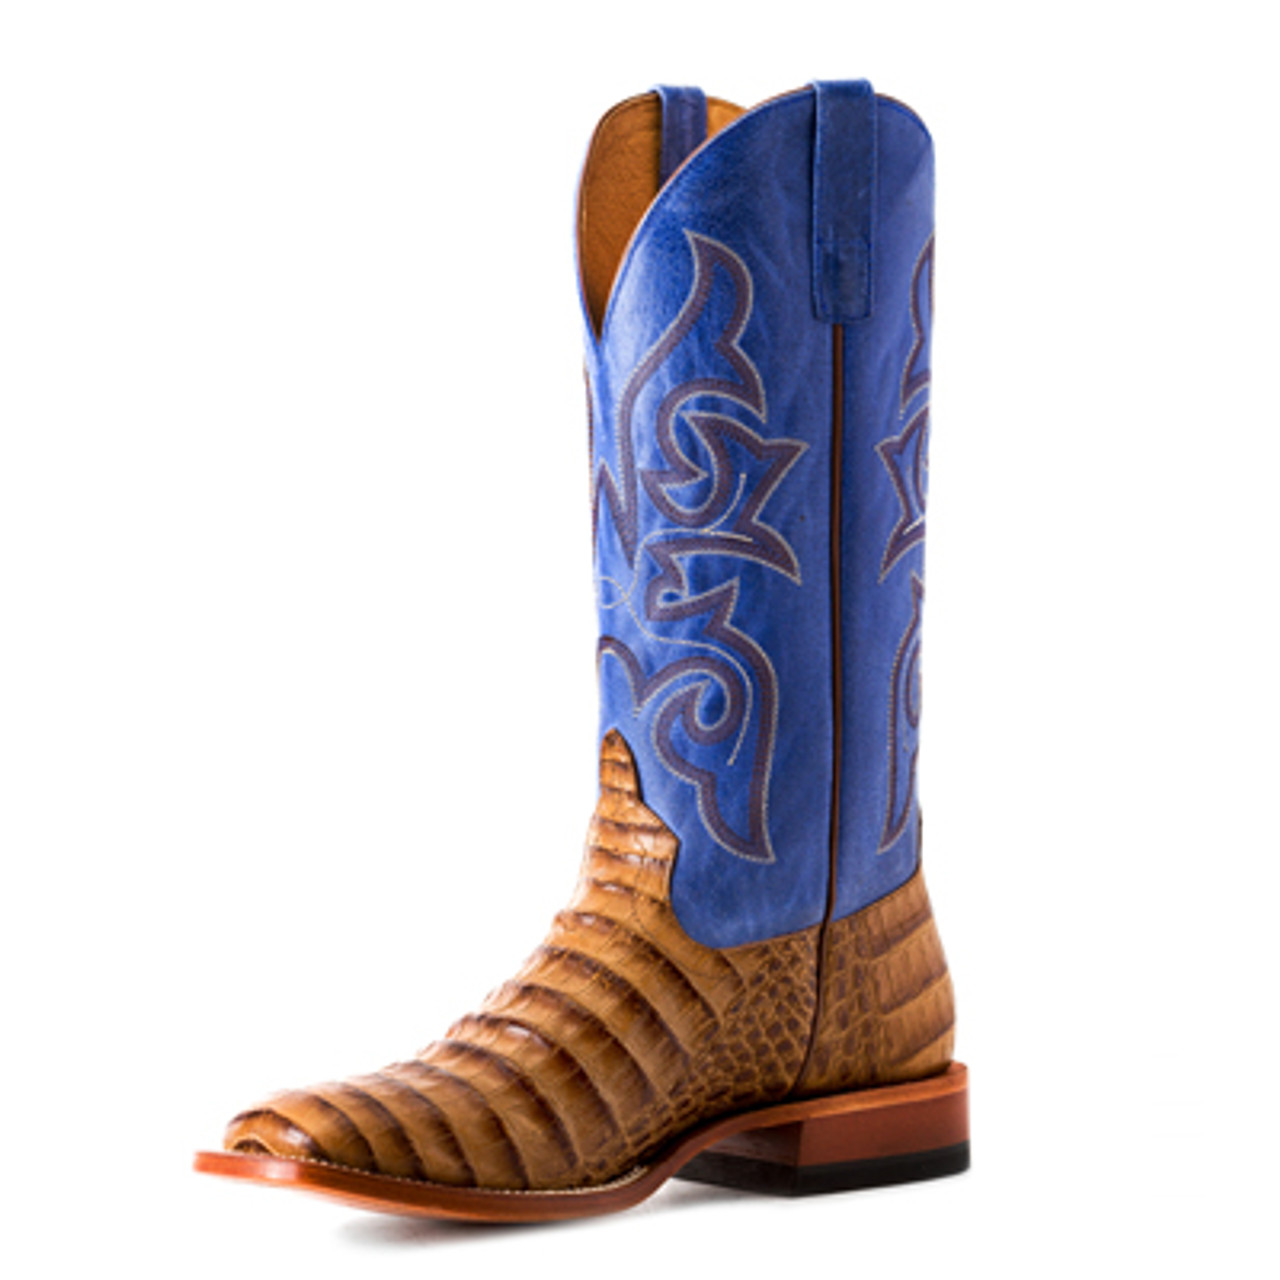 Horse Power By Anderson Bean Men's Boots - Toasted Tan Caiman / Blue  Sinsation - Billy's Western Wear